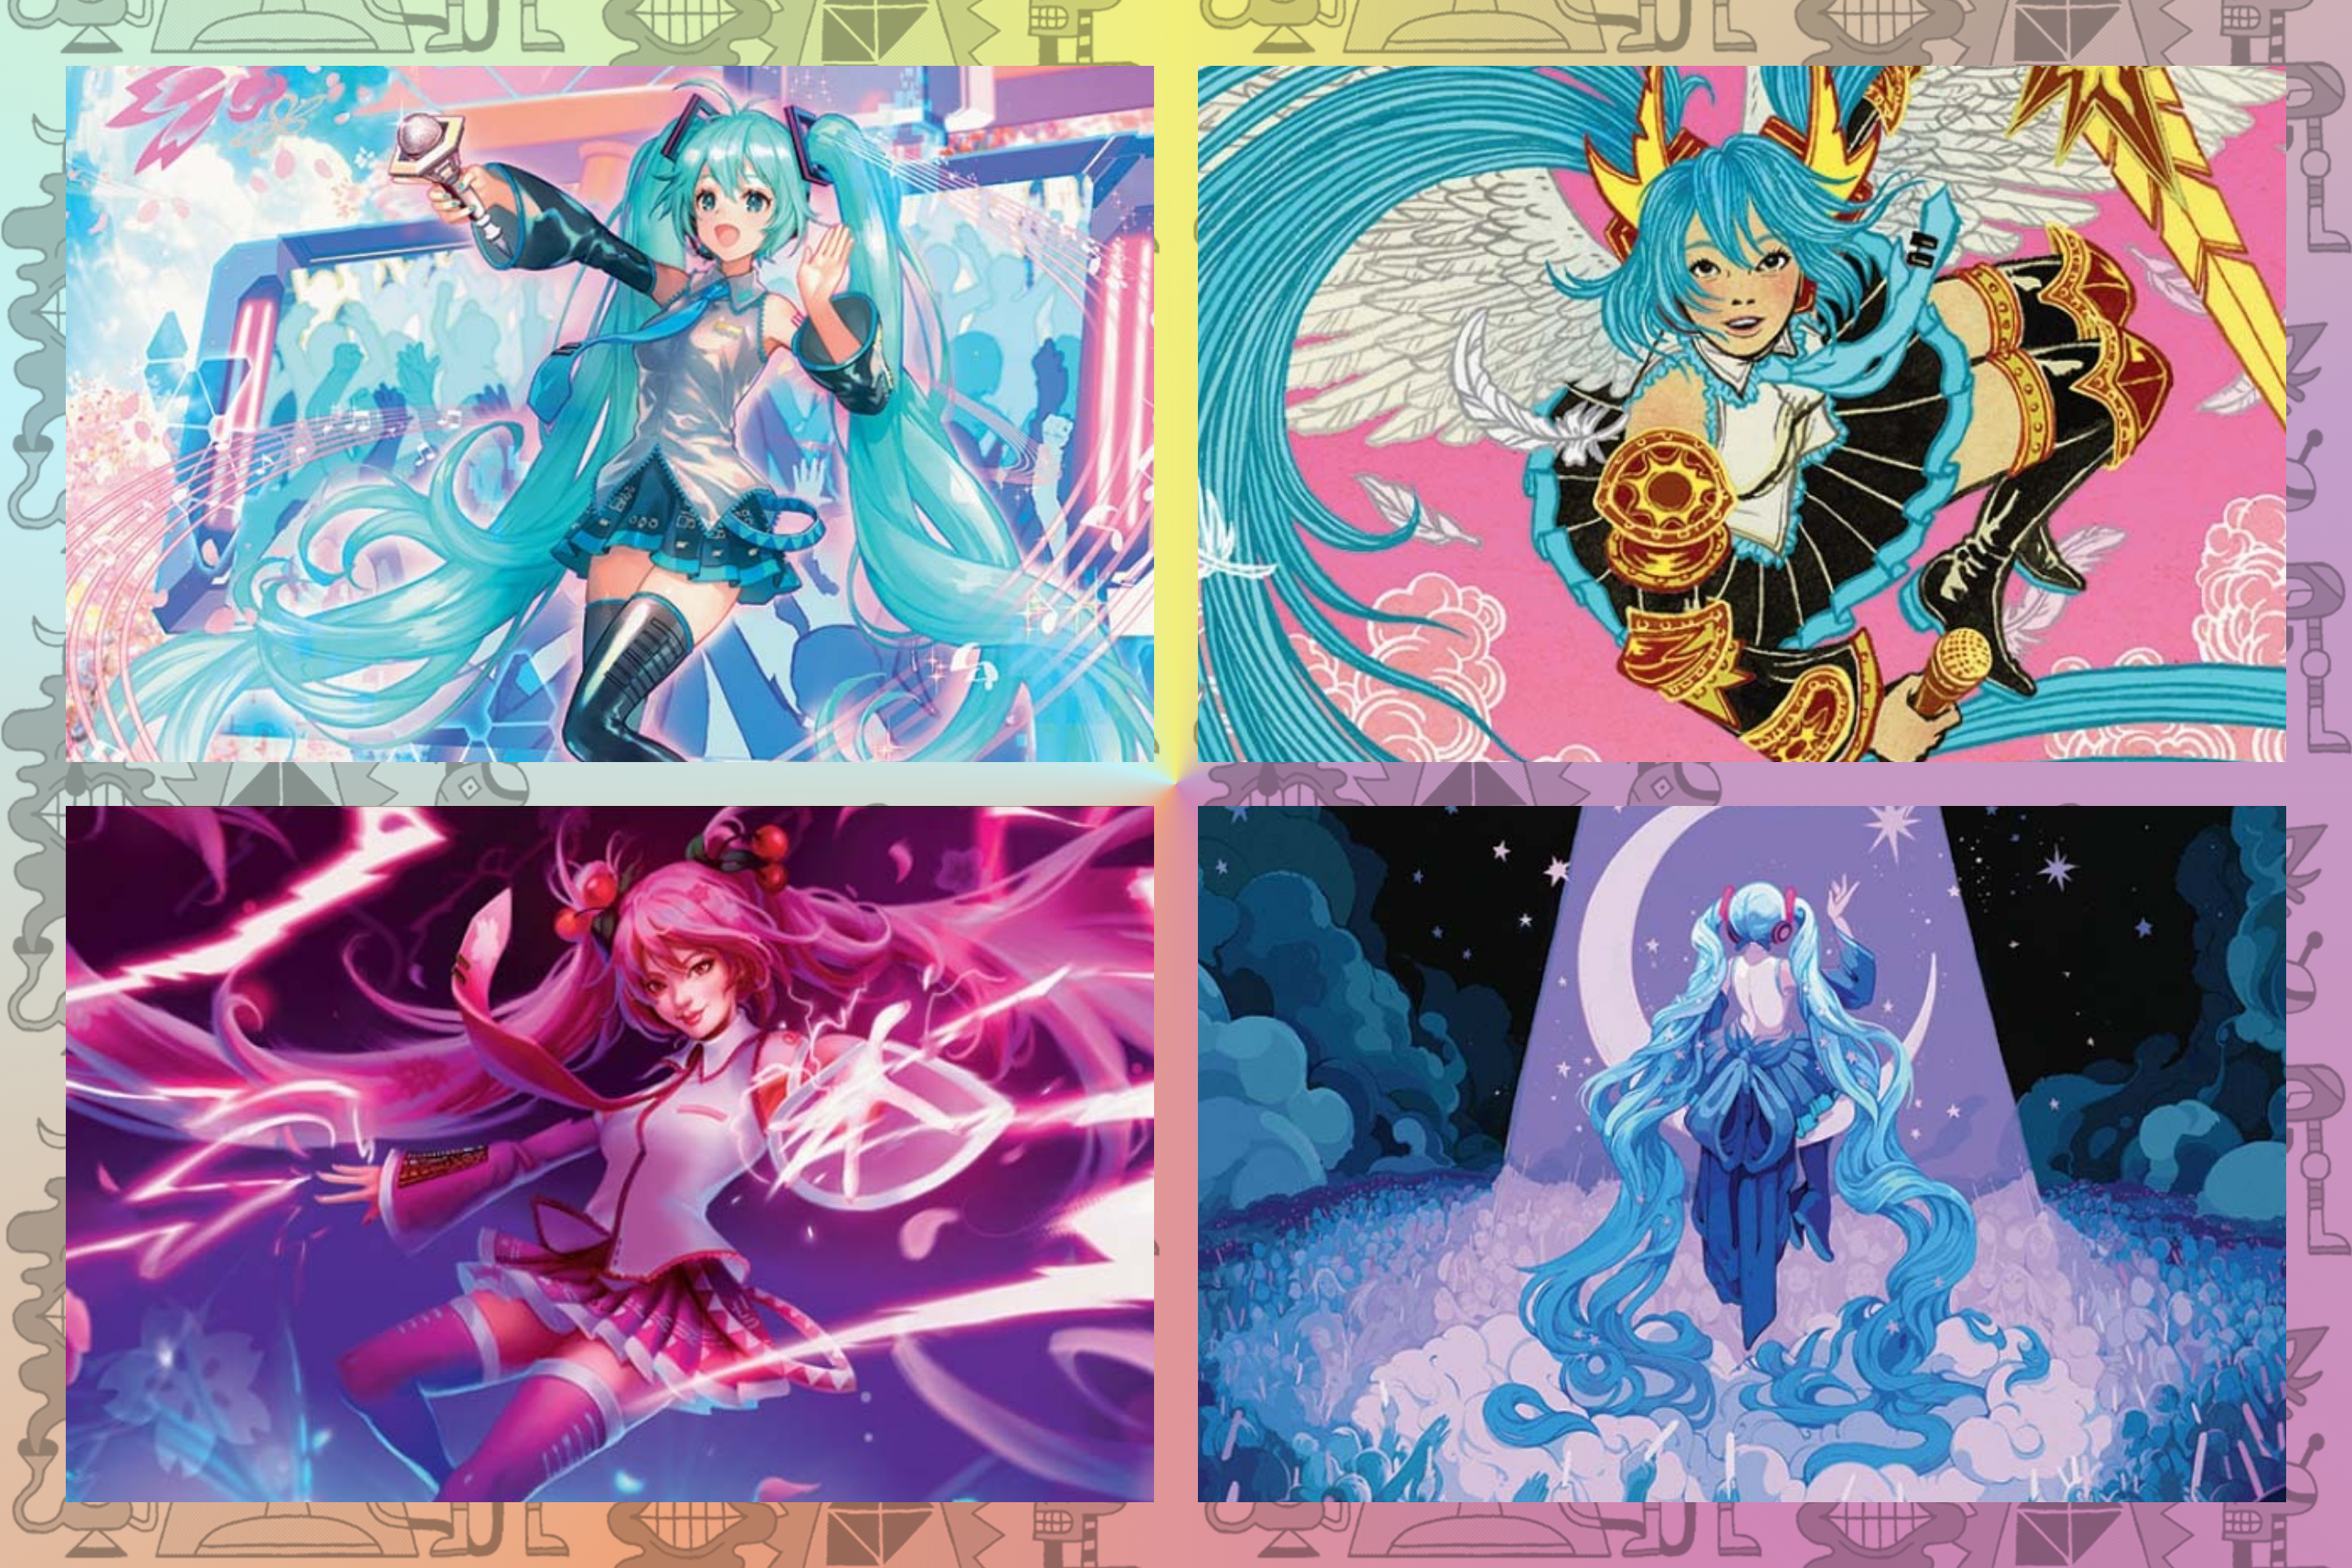 A graphic showing the card art for the Hatsune Miku Secret Lair drop for Magic The Gathering. There are four quadrants. The top left portays Miku at a concert, the top right shows her in an illustrated style with angel’s wings, the bottom left shows Miku with pink electric energy, and the bottom right shows her with flowing twin pigtails as she walks towards the moon. 